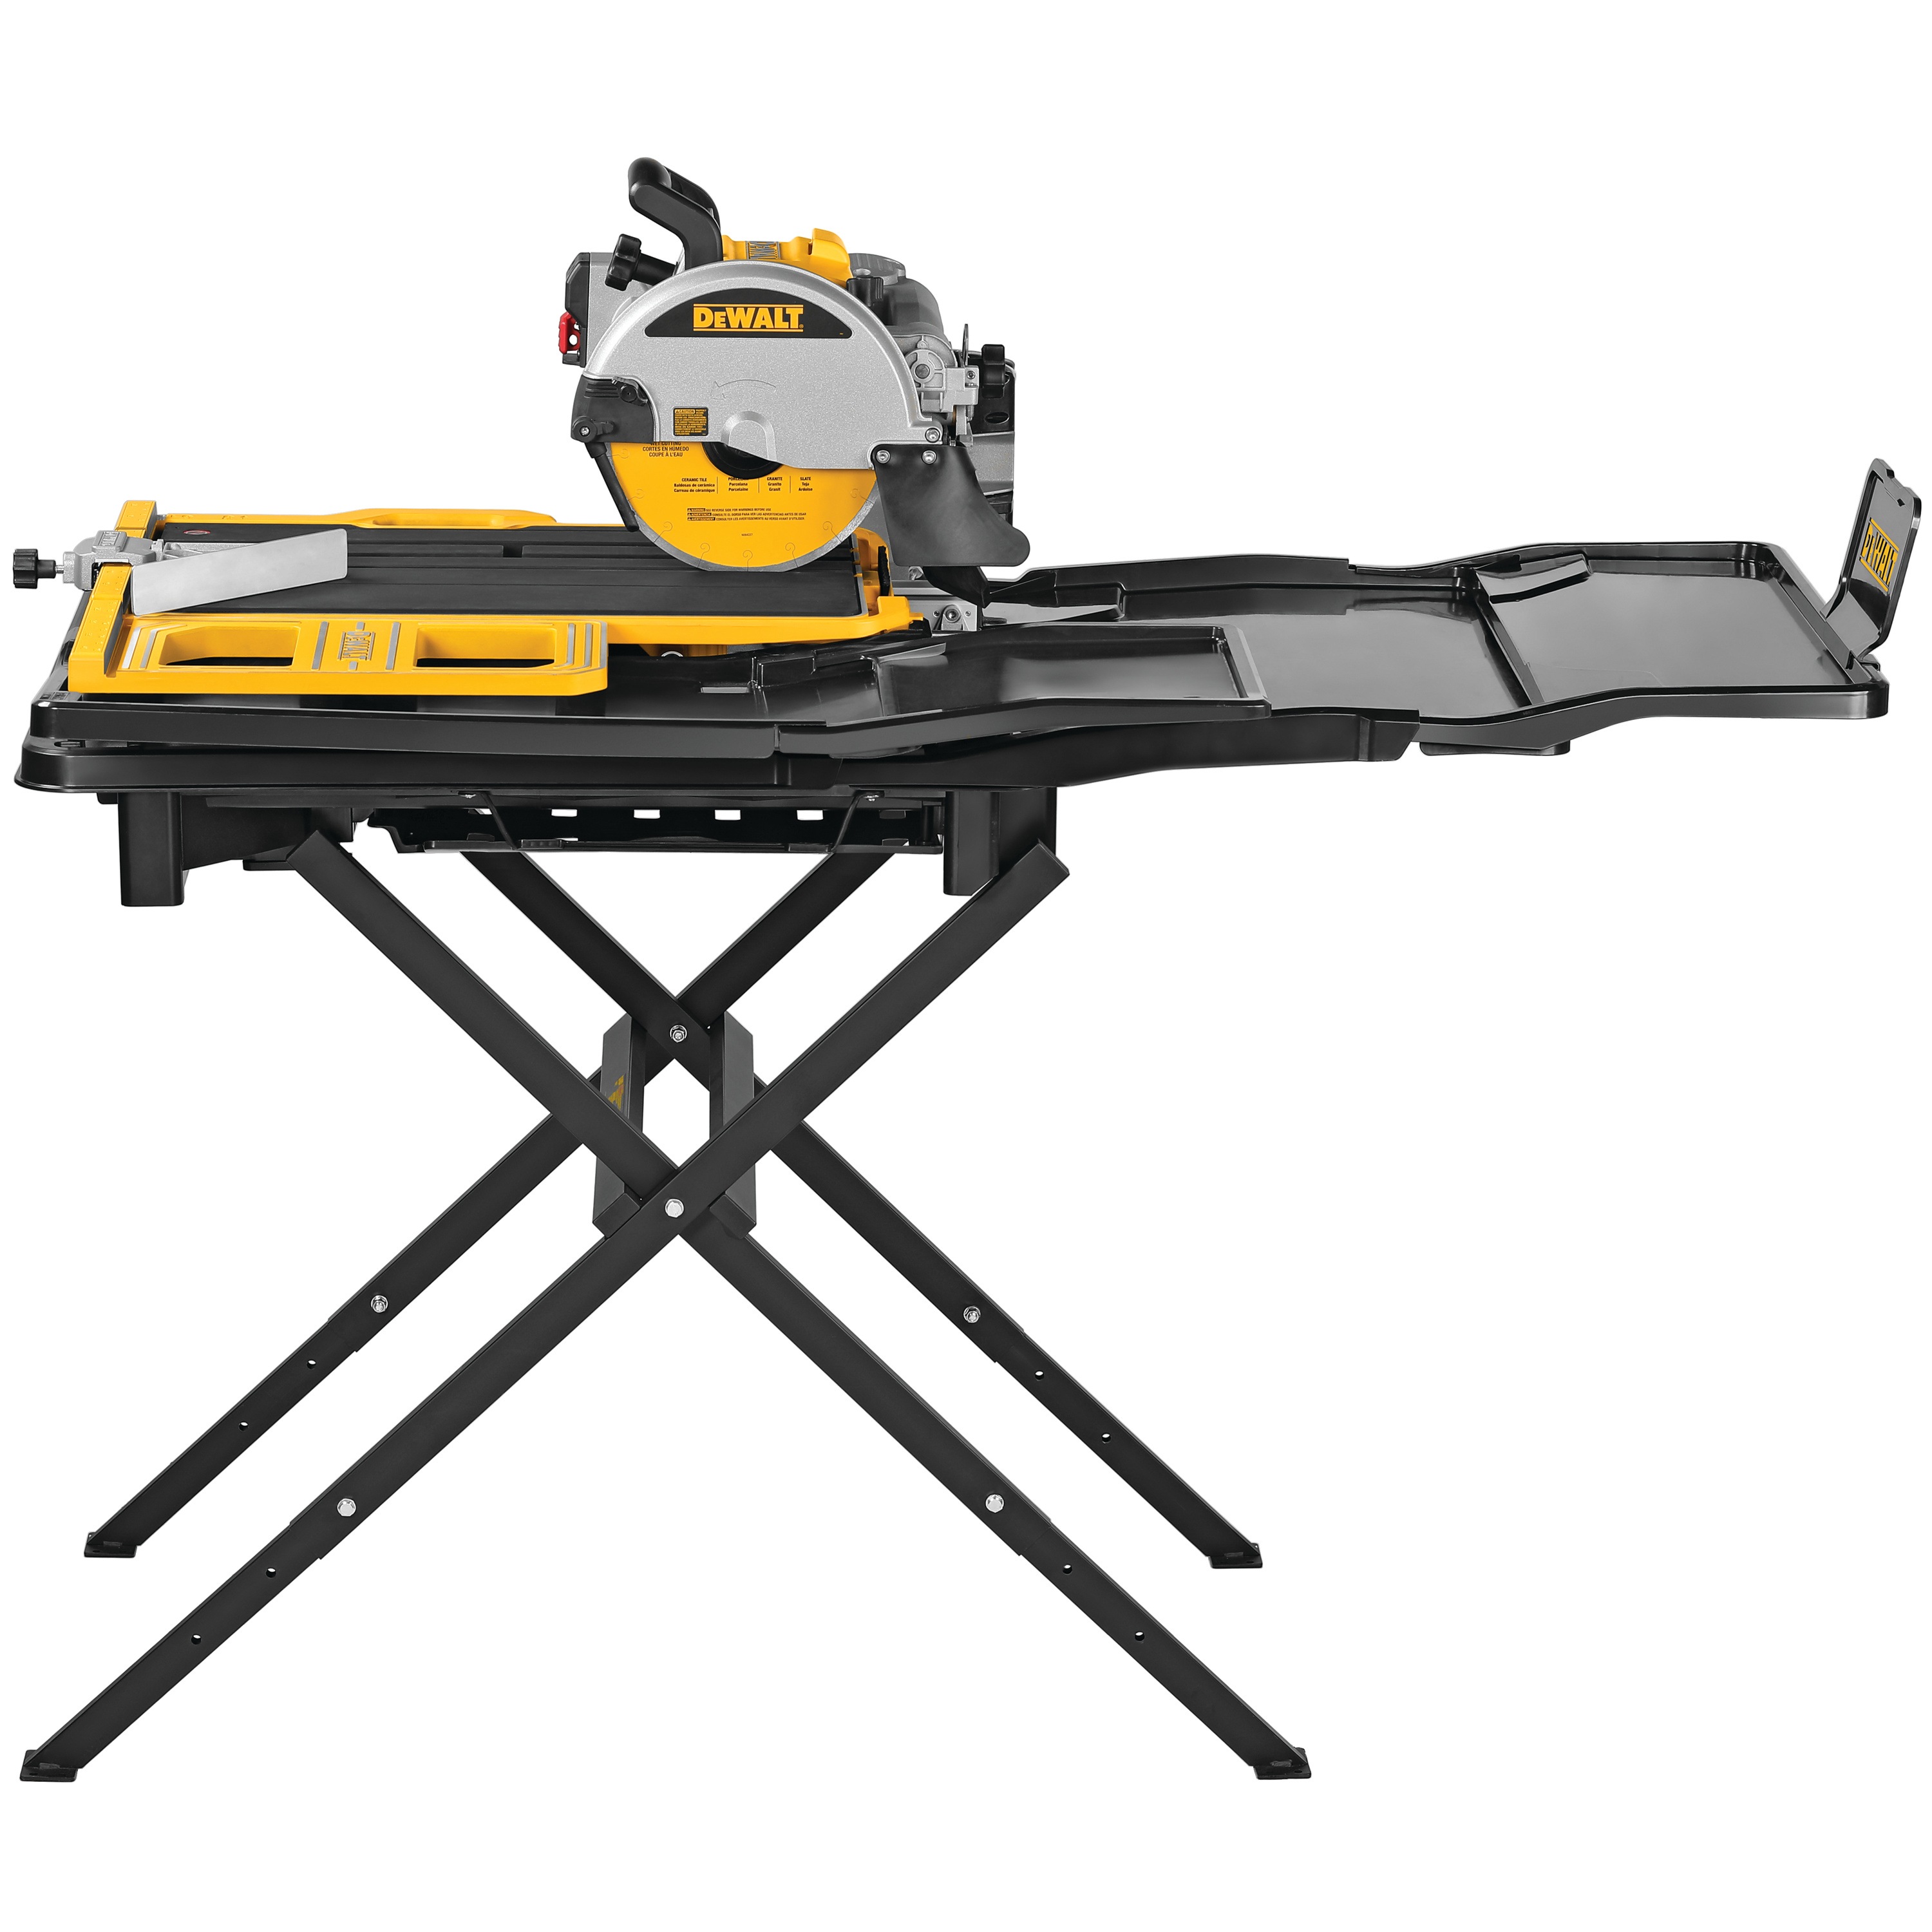 10 in high capacity wet tile saw with